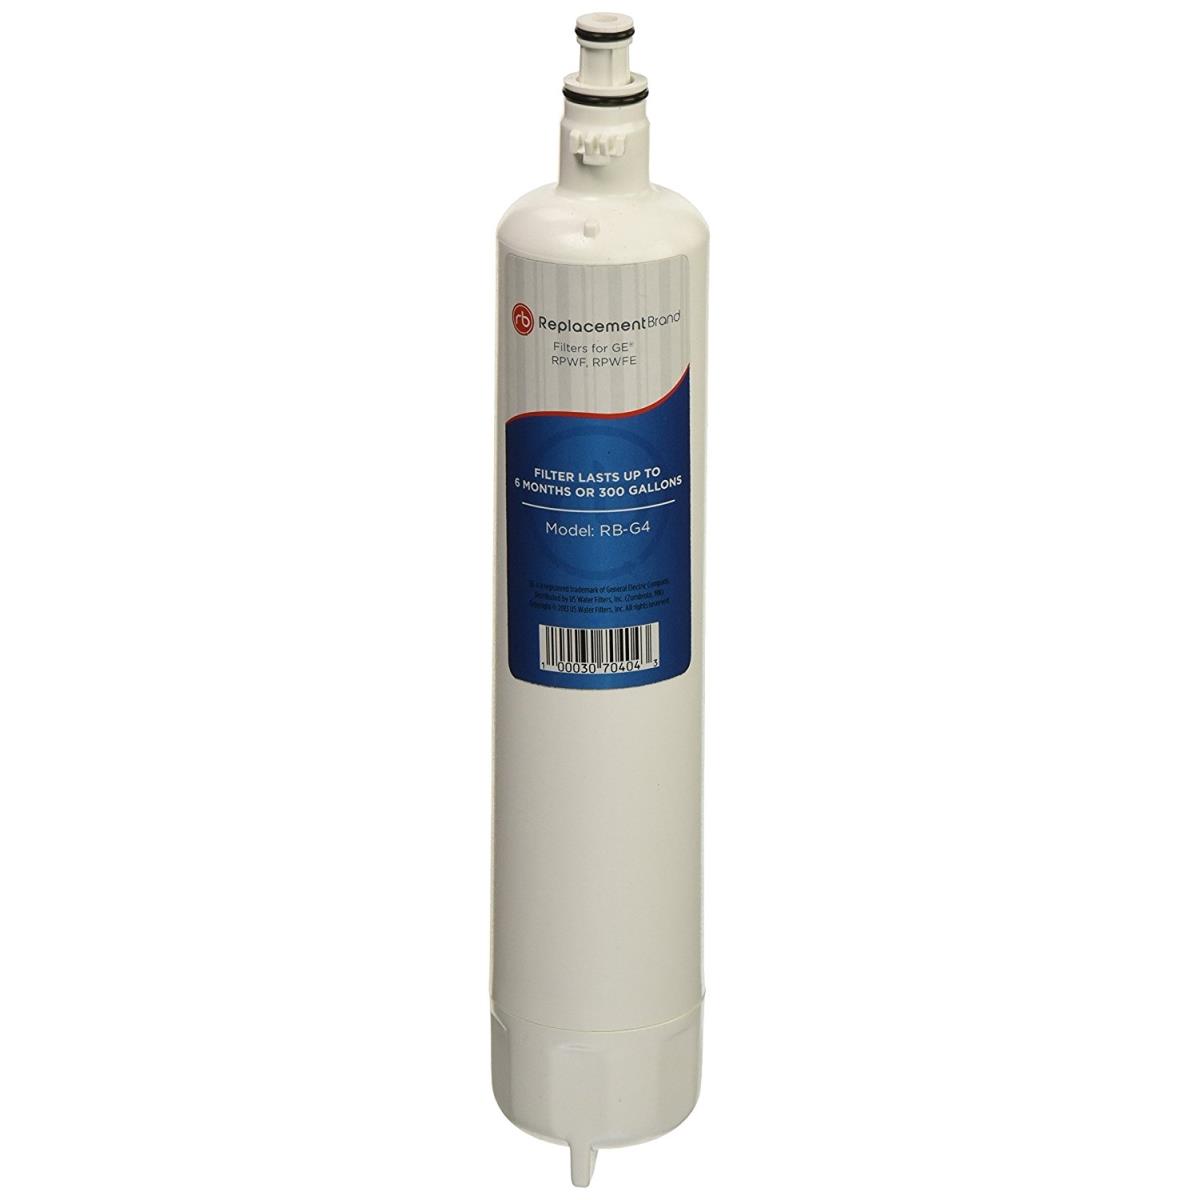 Replacement Brand Refrigerator Filter for GE RPWF & RPWFE -  Commercial Water Distributing, CO82525